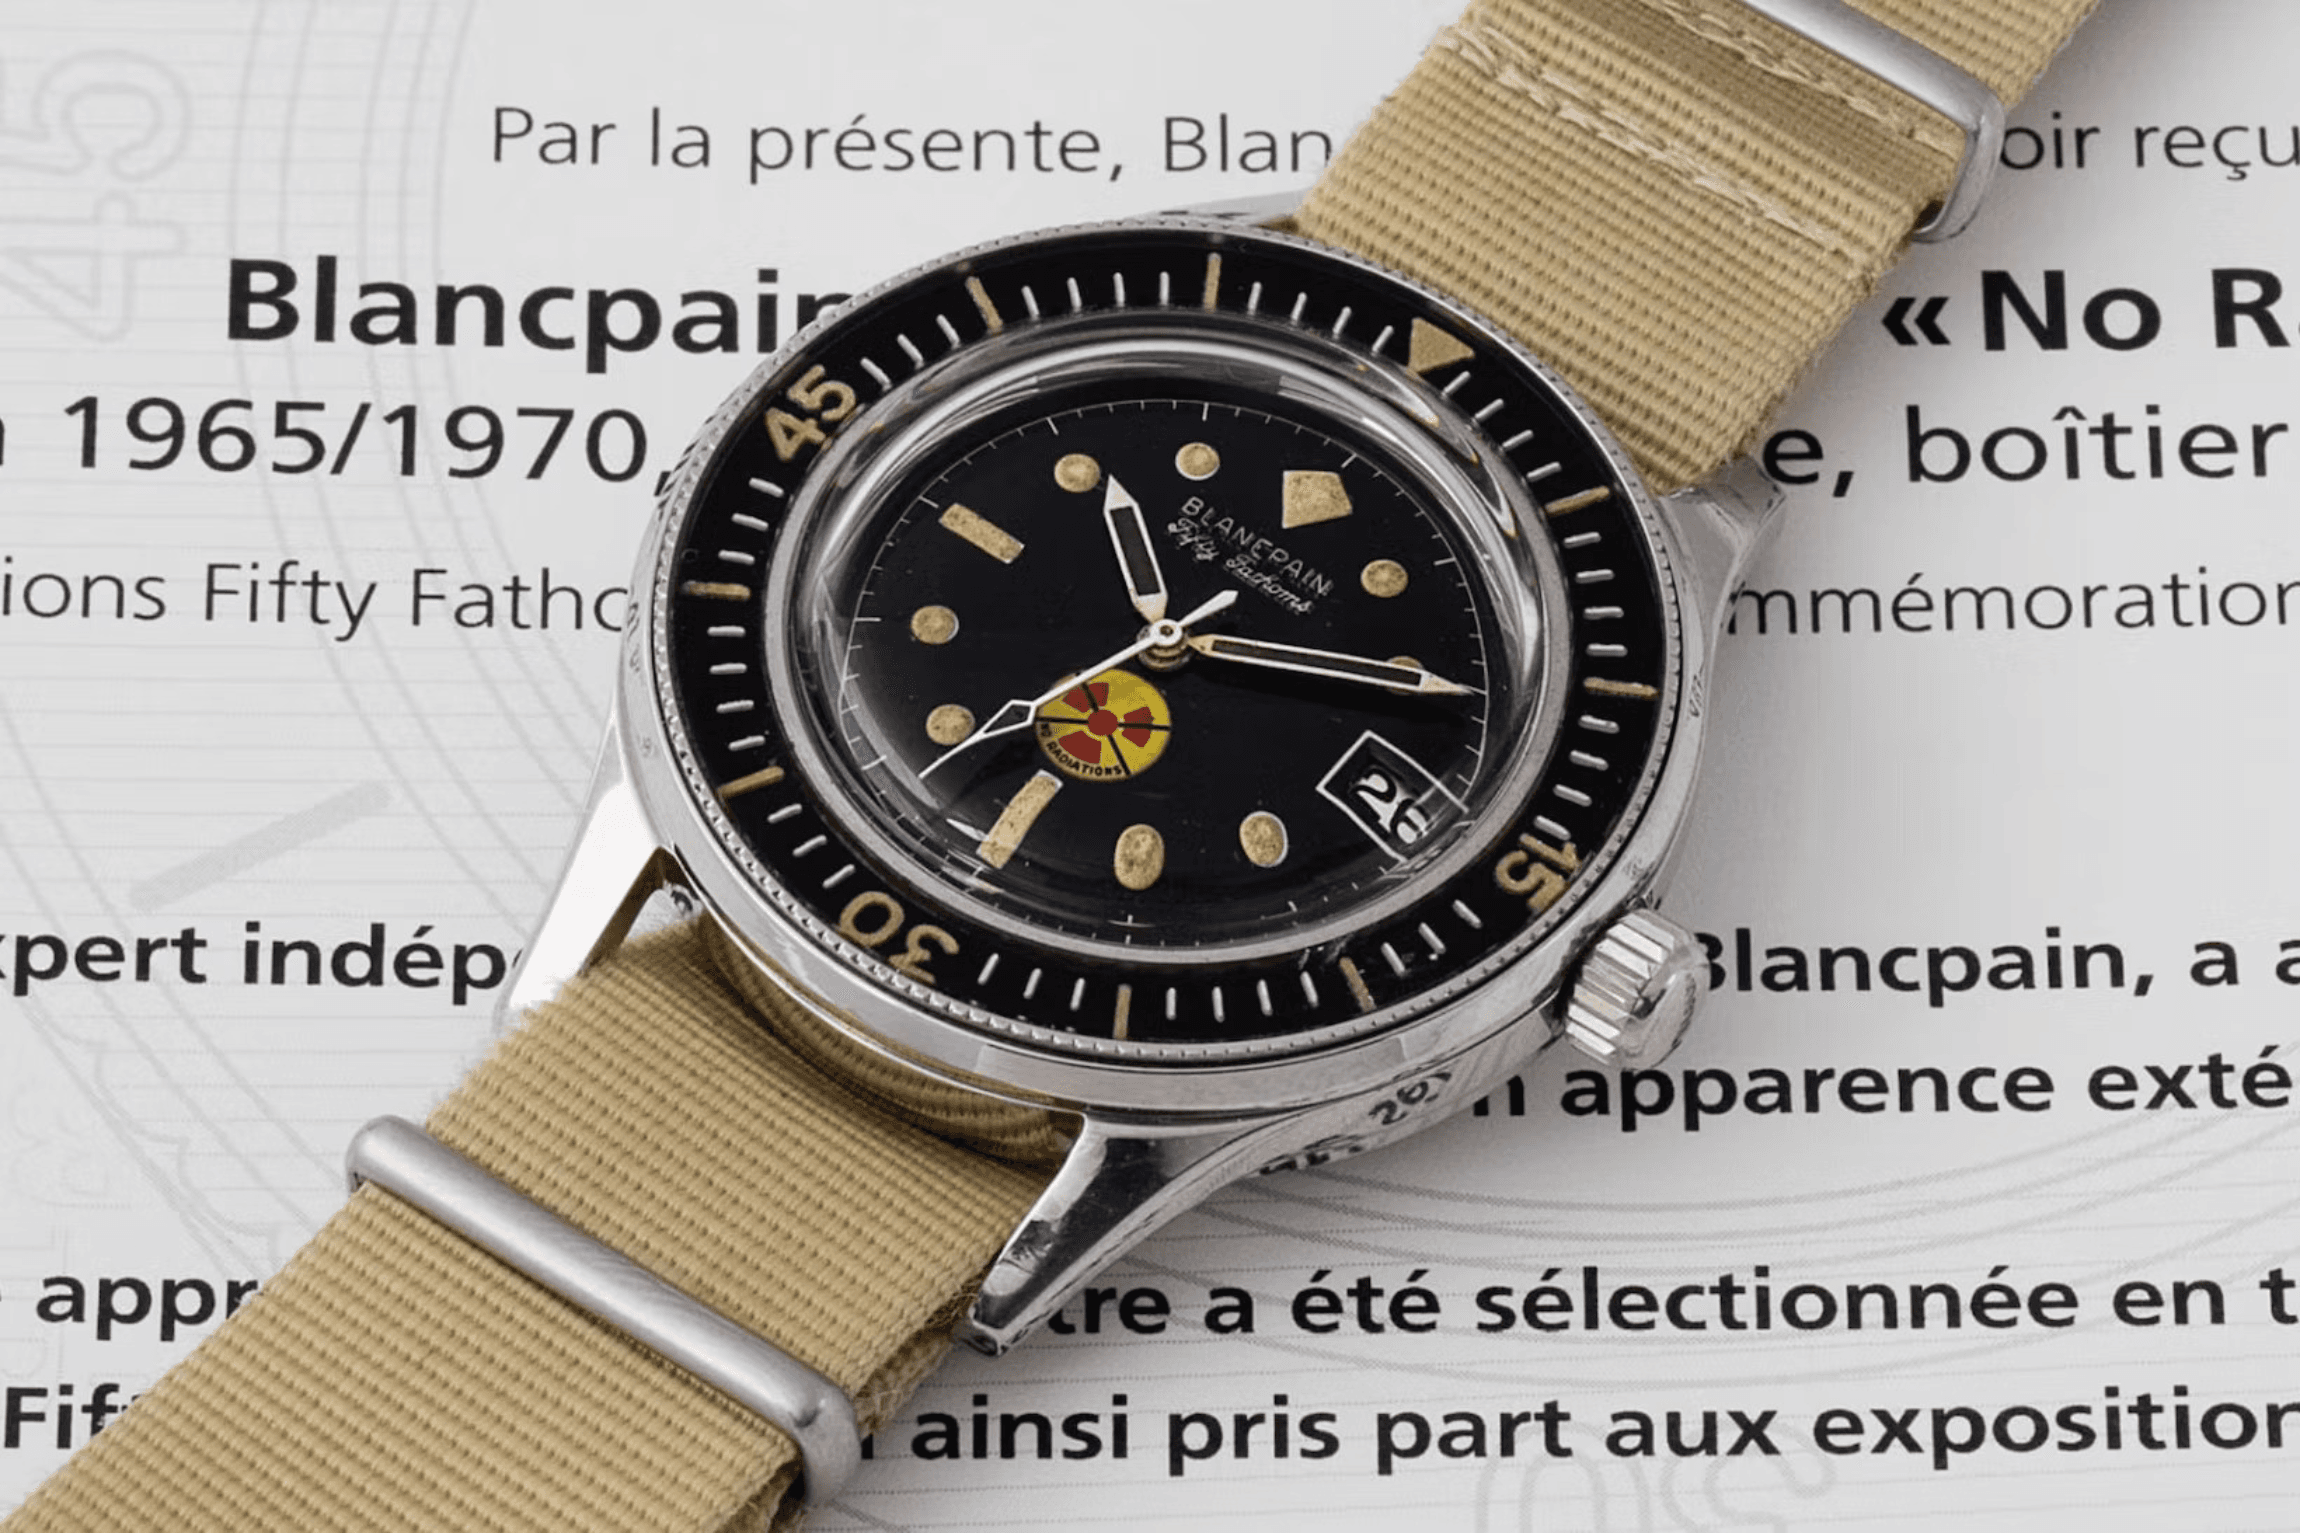 Blancpain Fifty Fathoms "No Radiations" dial Photo: Phillips